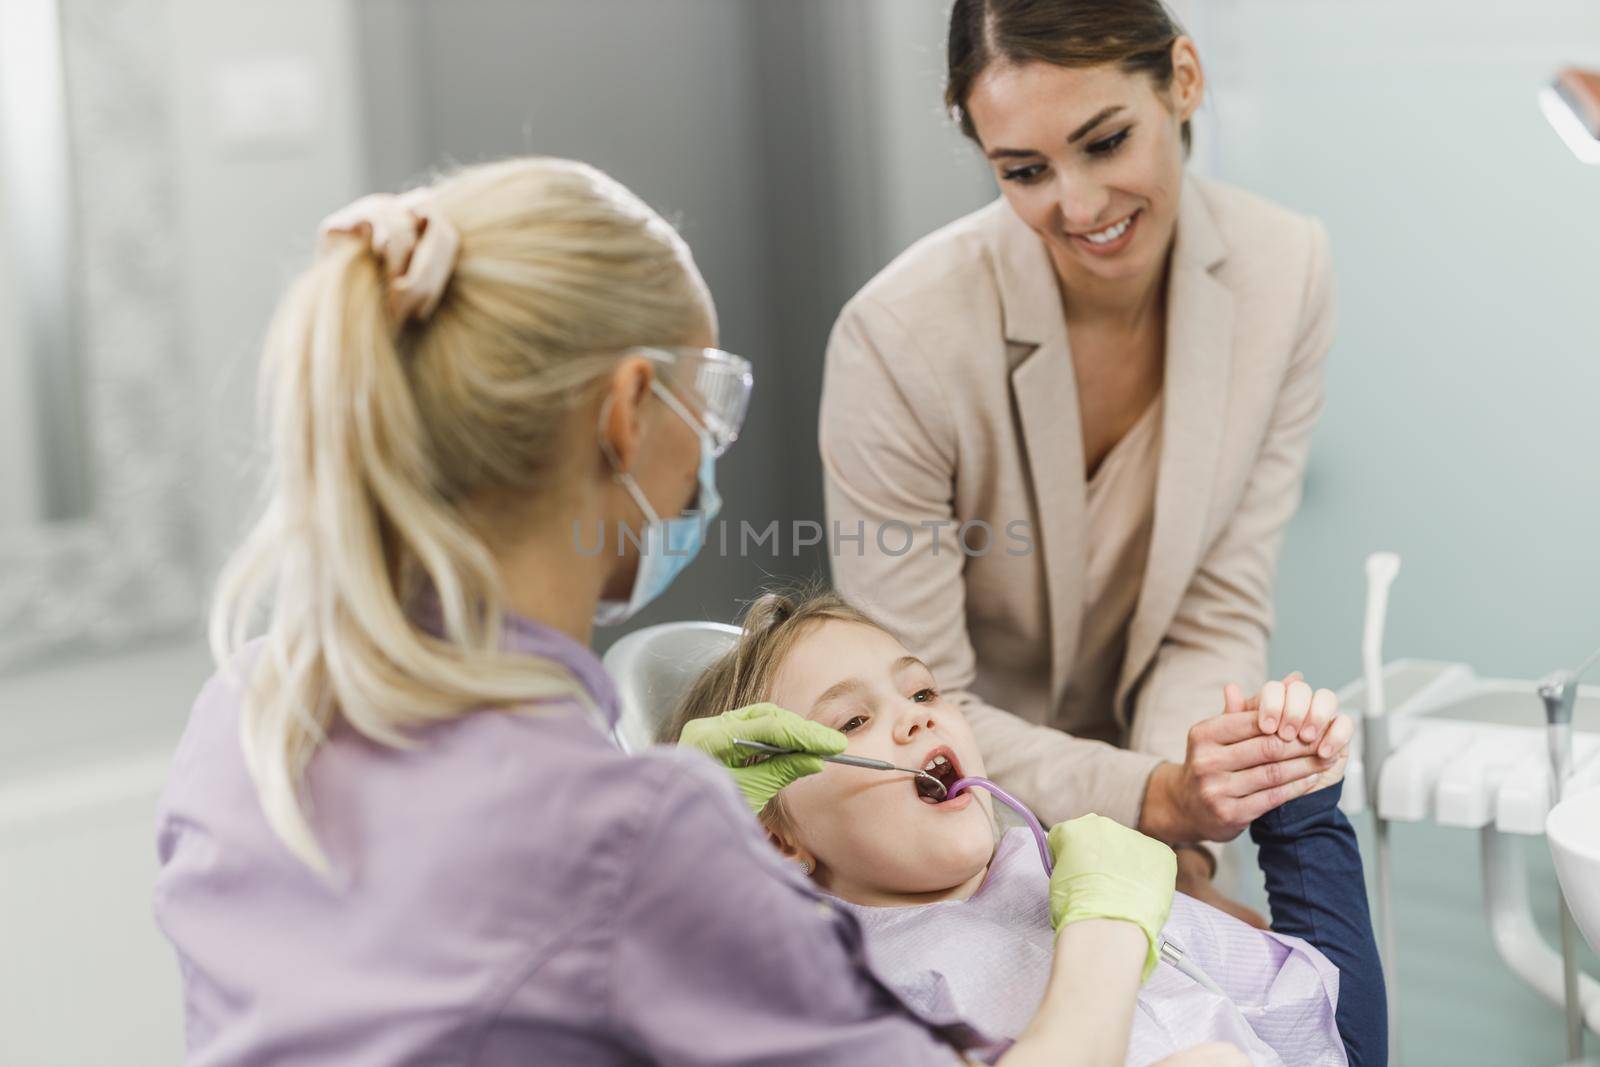 A cute little girl with her mom getting her teeth checked by dentist at dental clinic.